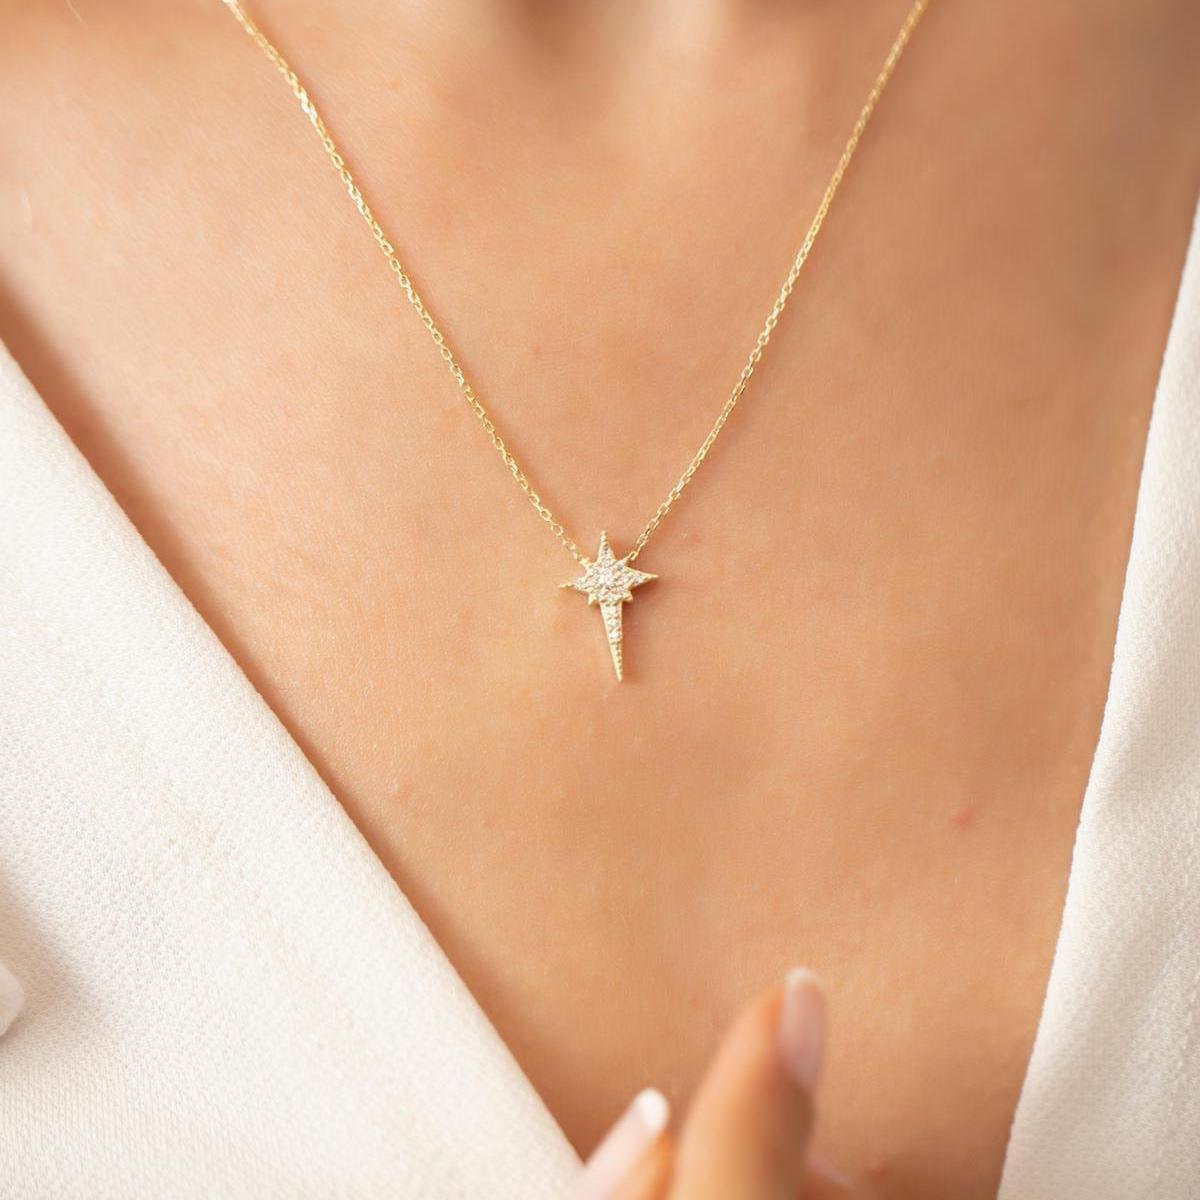 North Star Necklace • Star Necklace Gold • Gold Star Necklace - Trending Silver Gifts